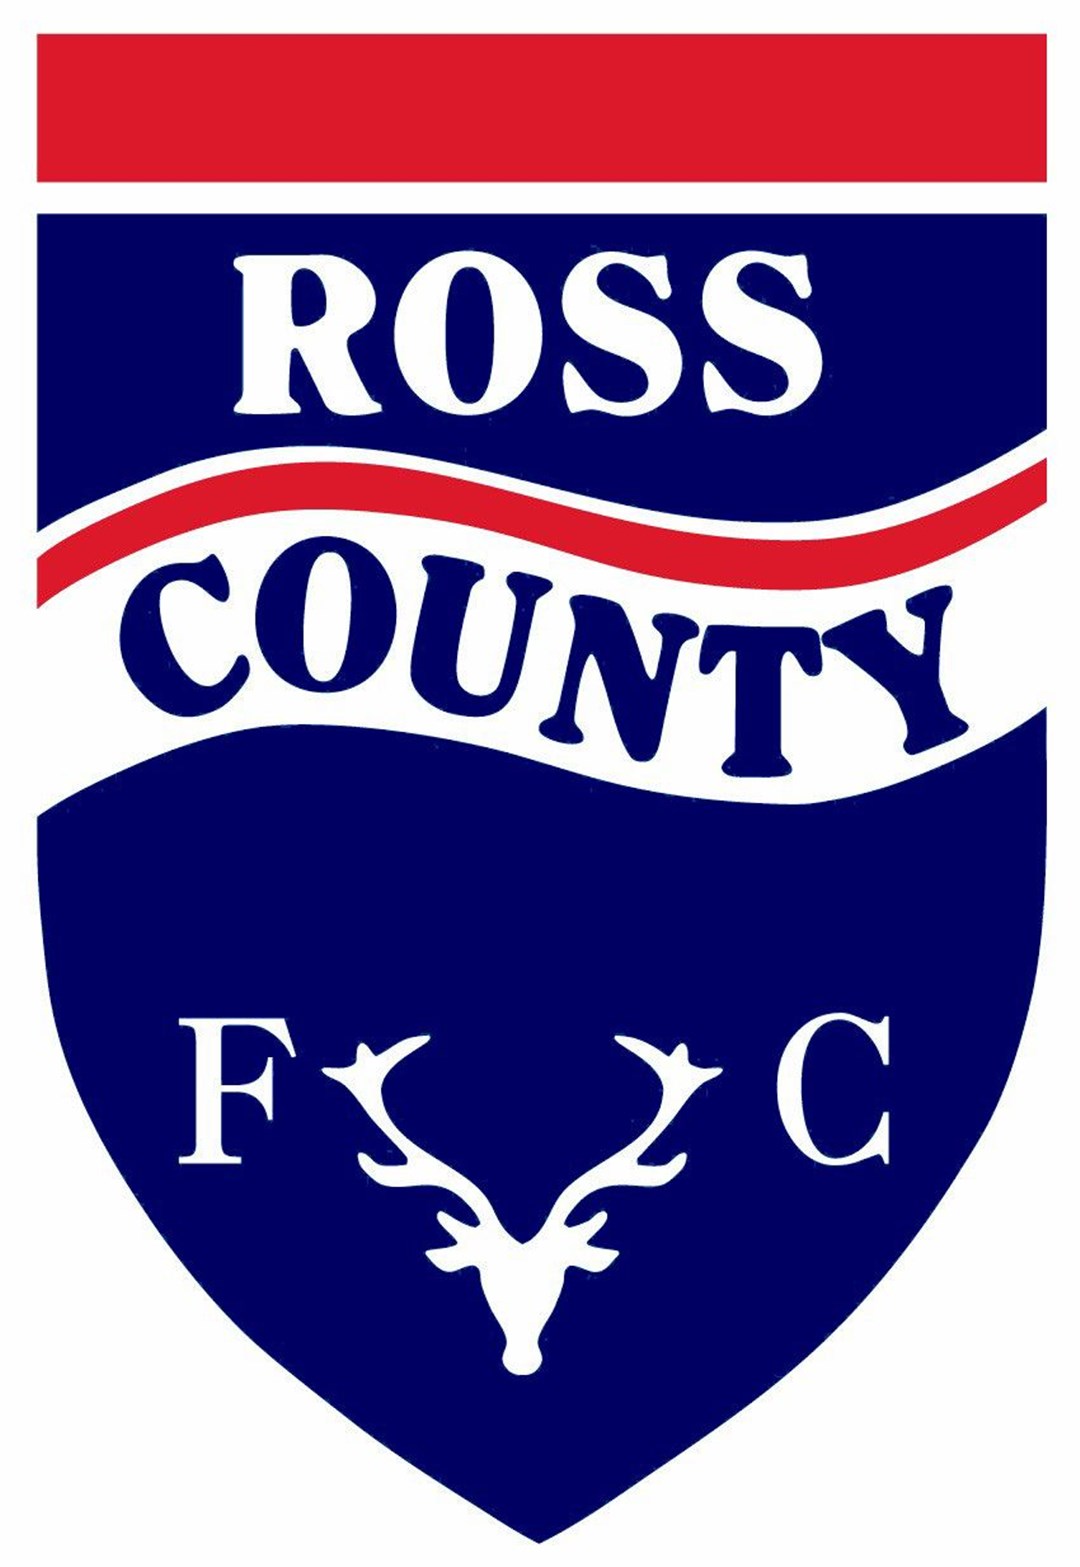 Ross County receive £50,000.